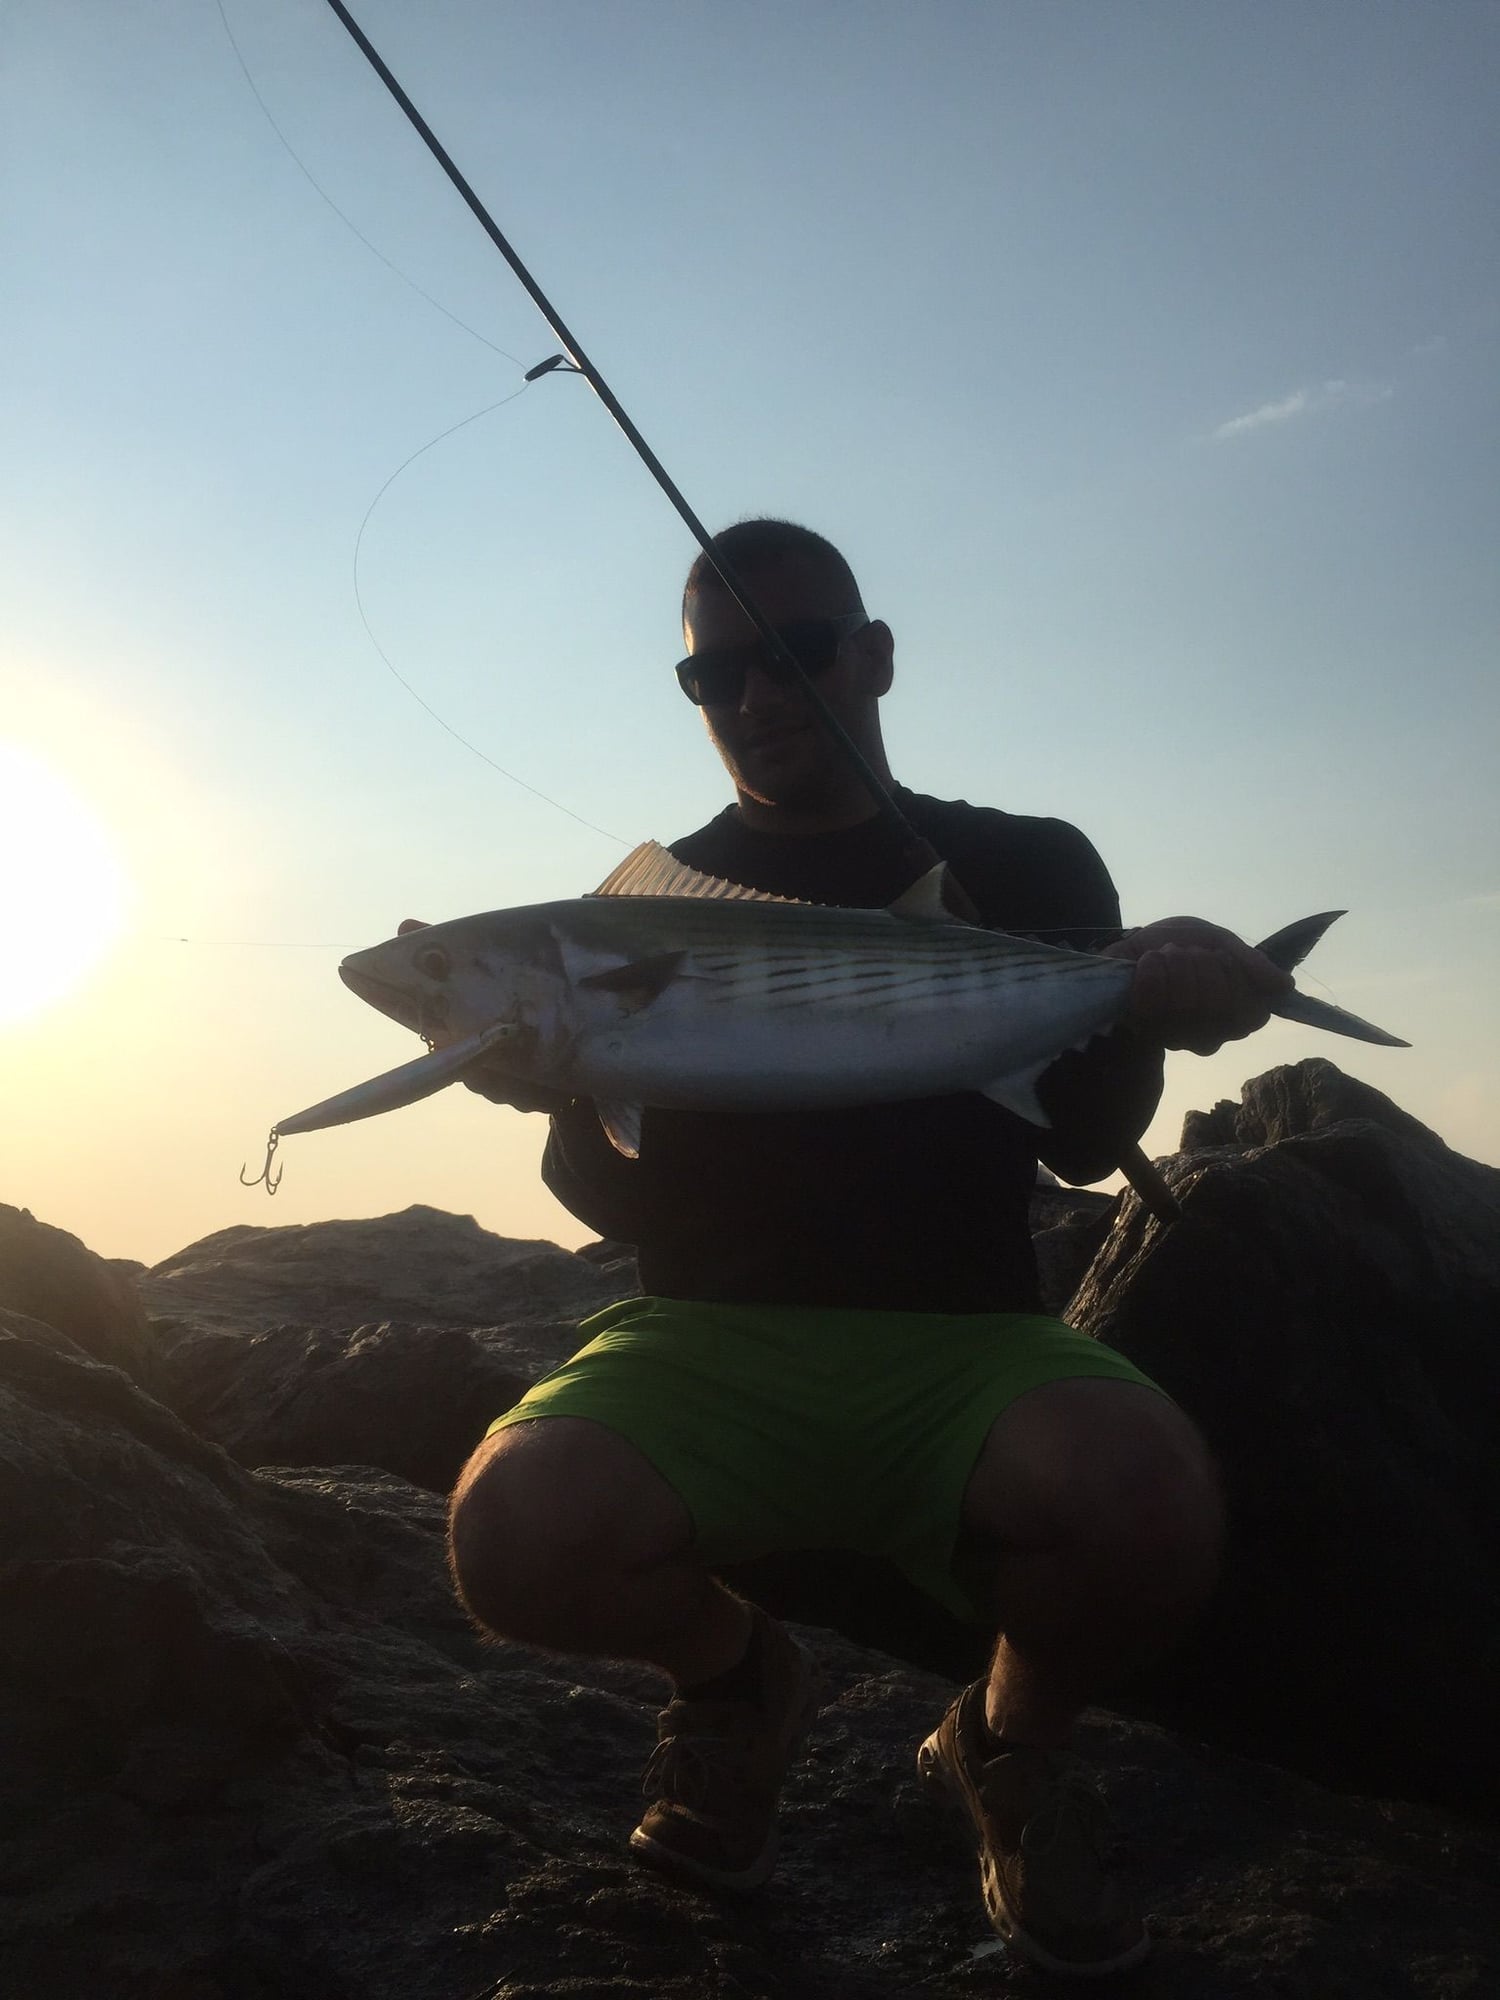 Casting for bonito? - The Hull Truth - Boating and Fishing Forum